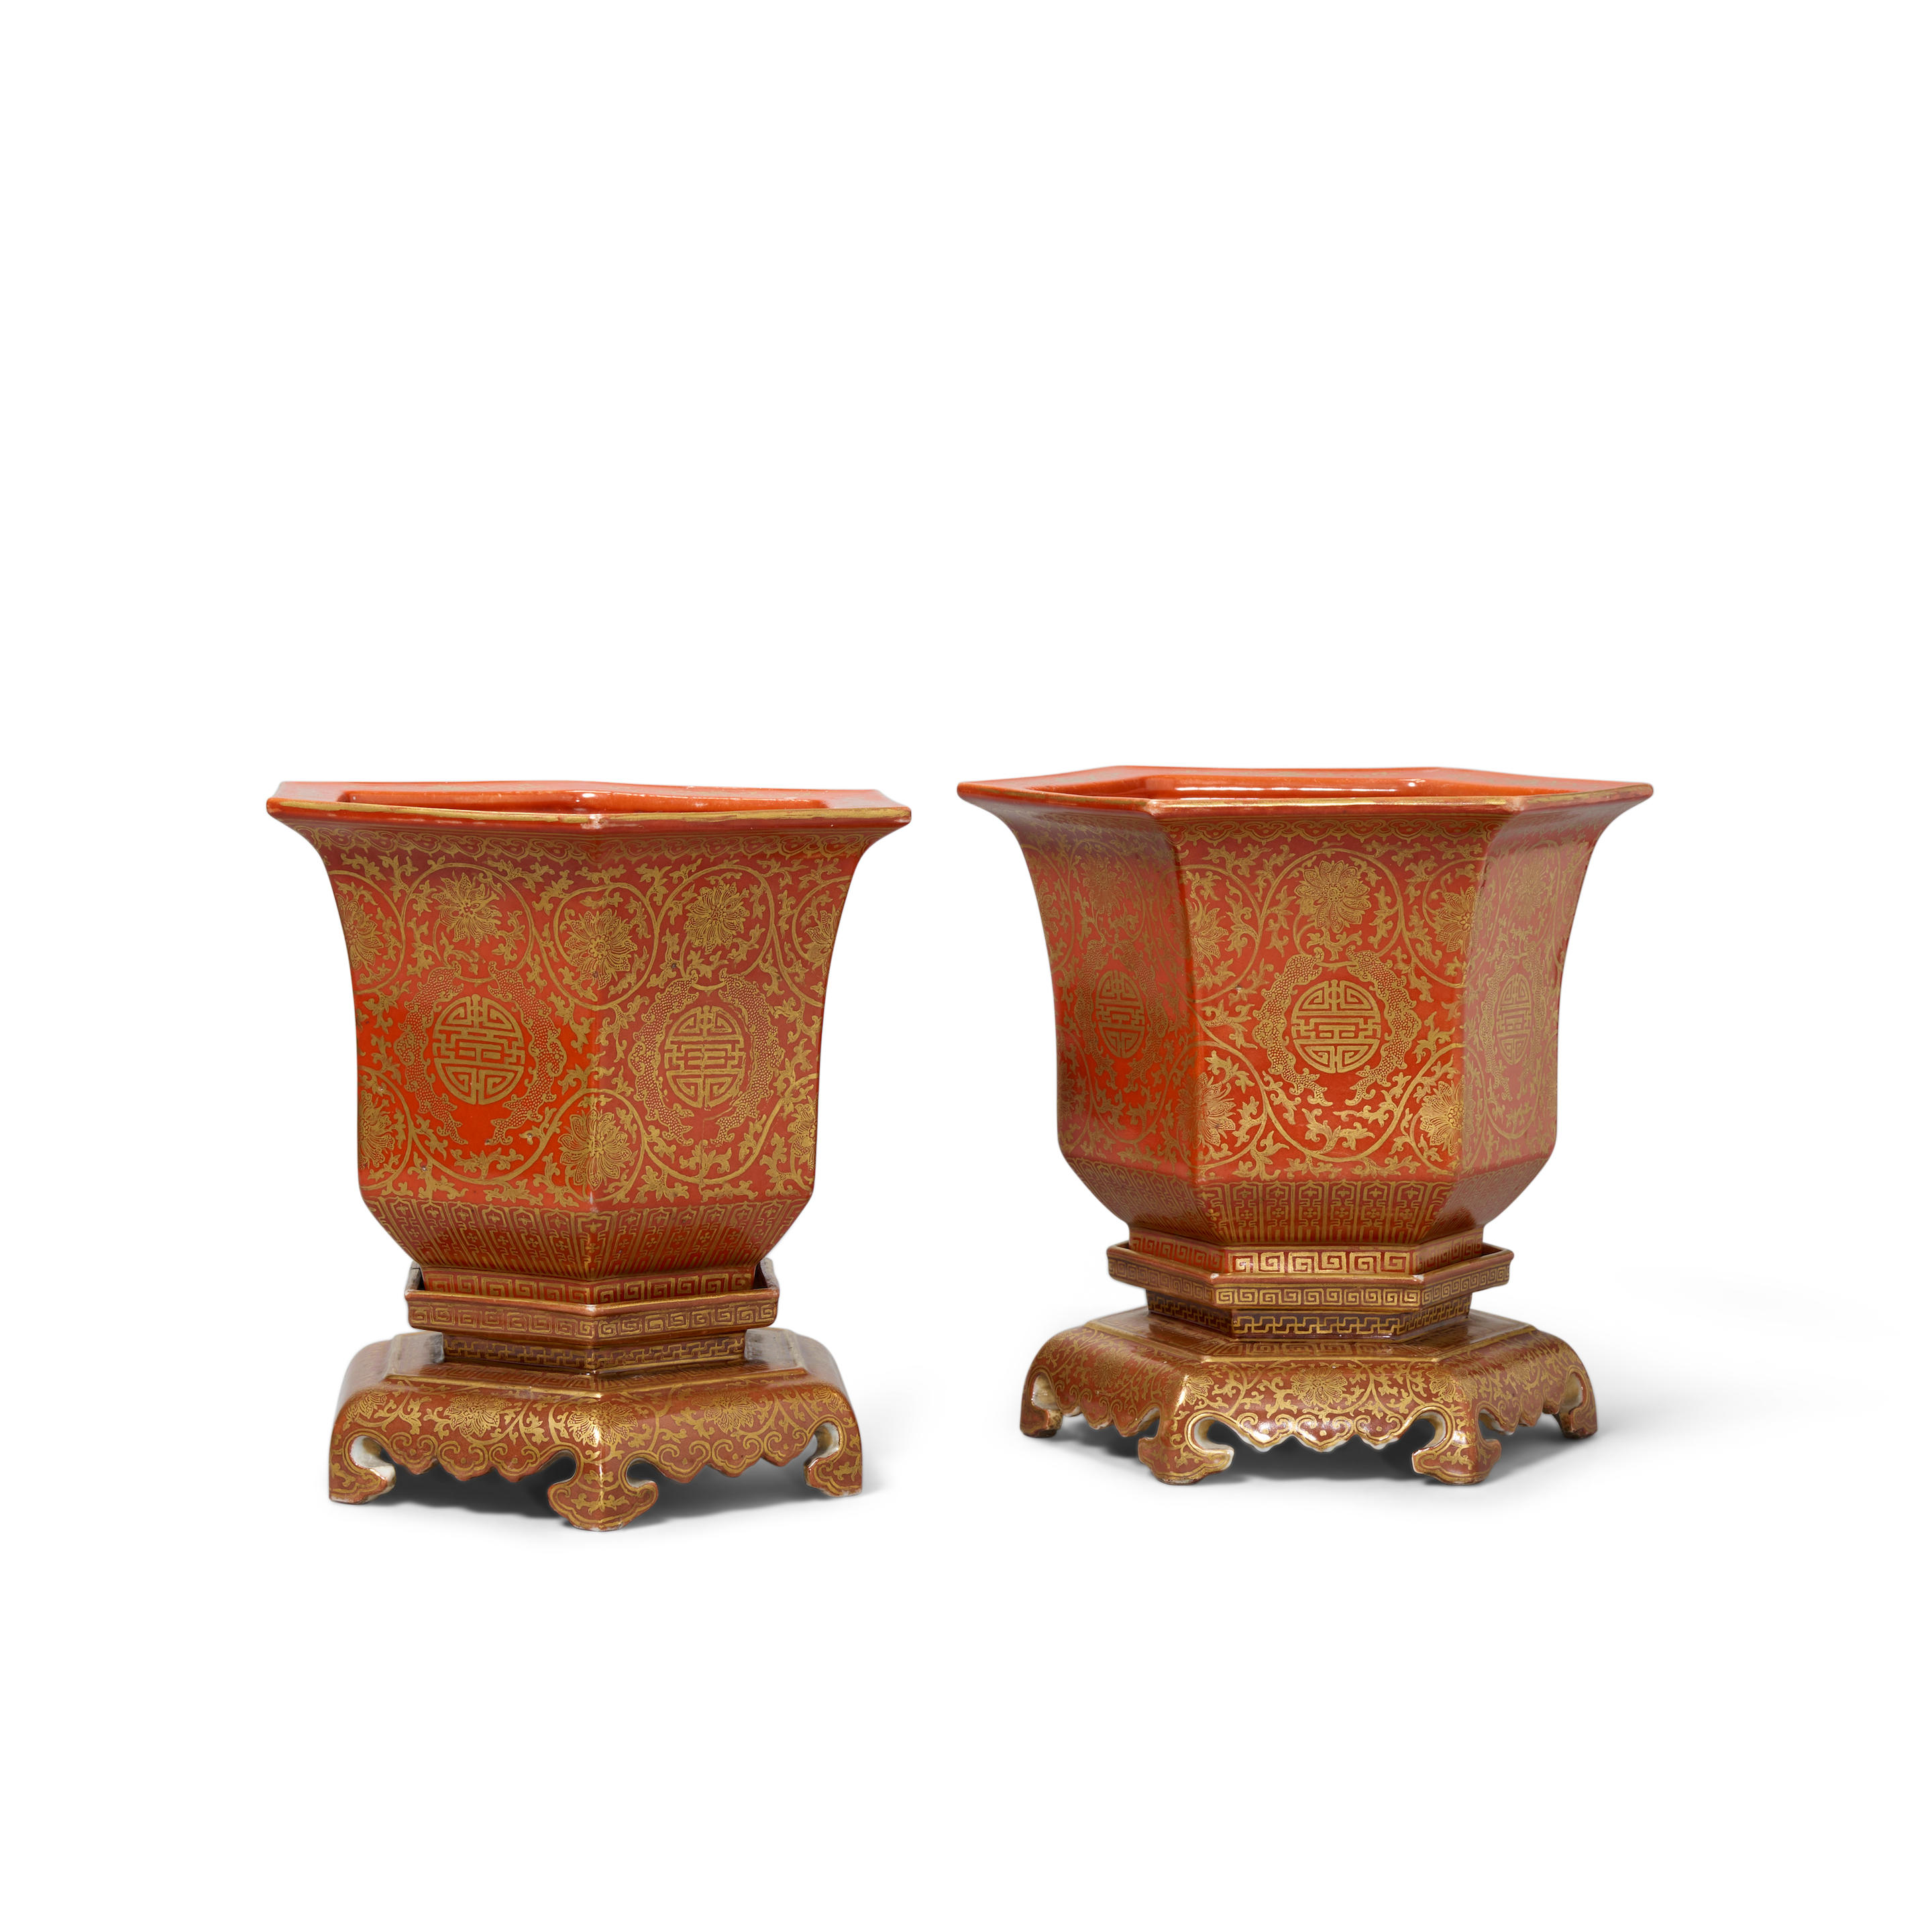 A PAIR OF CORAL-GROUND AND GILT-DECORATED